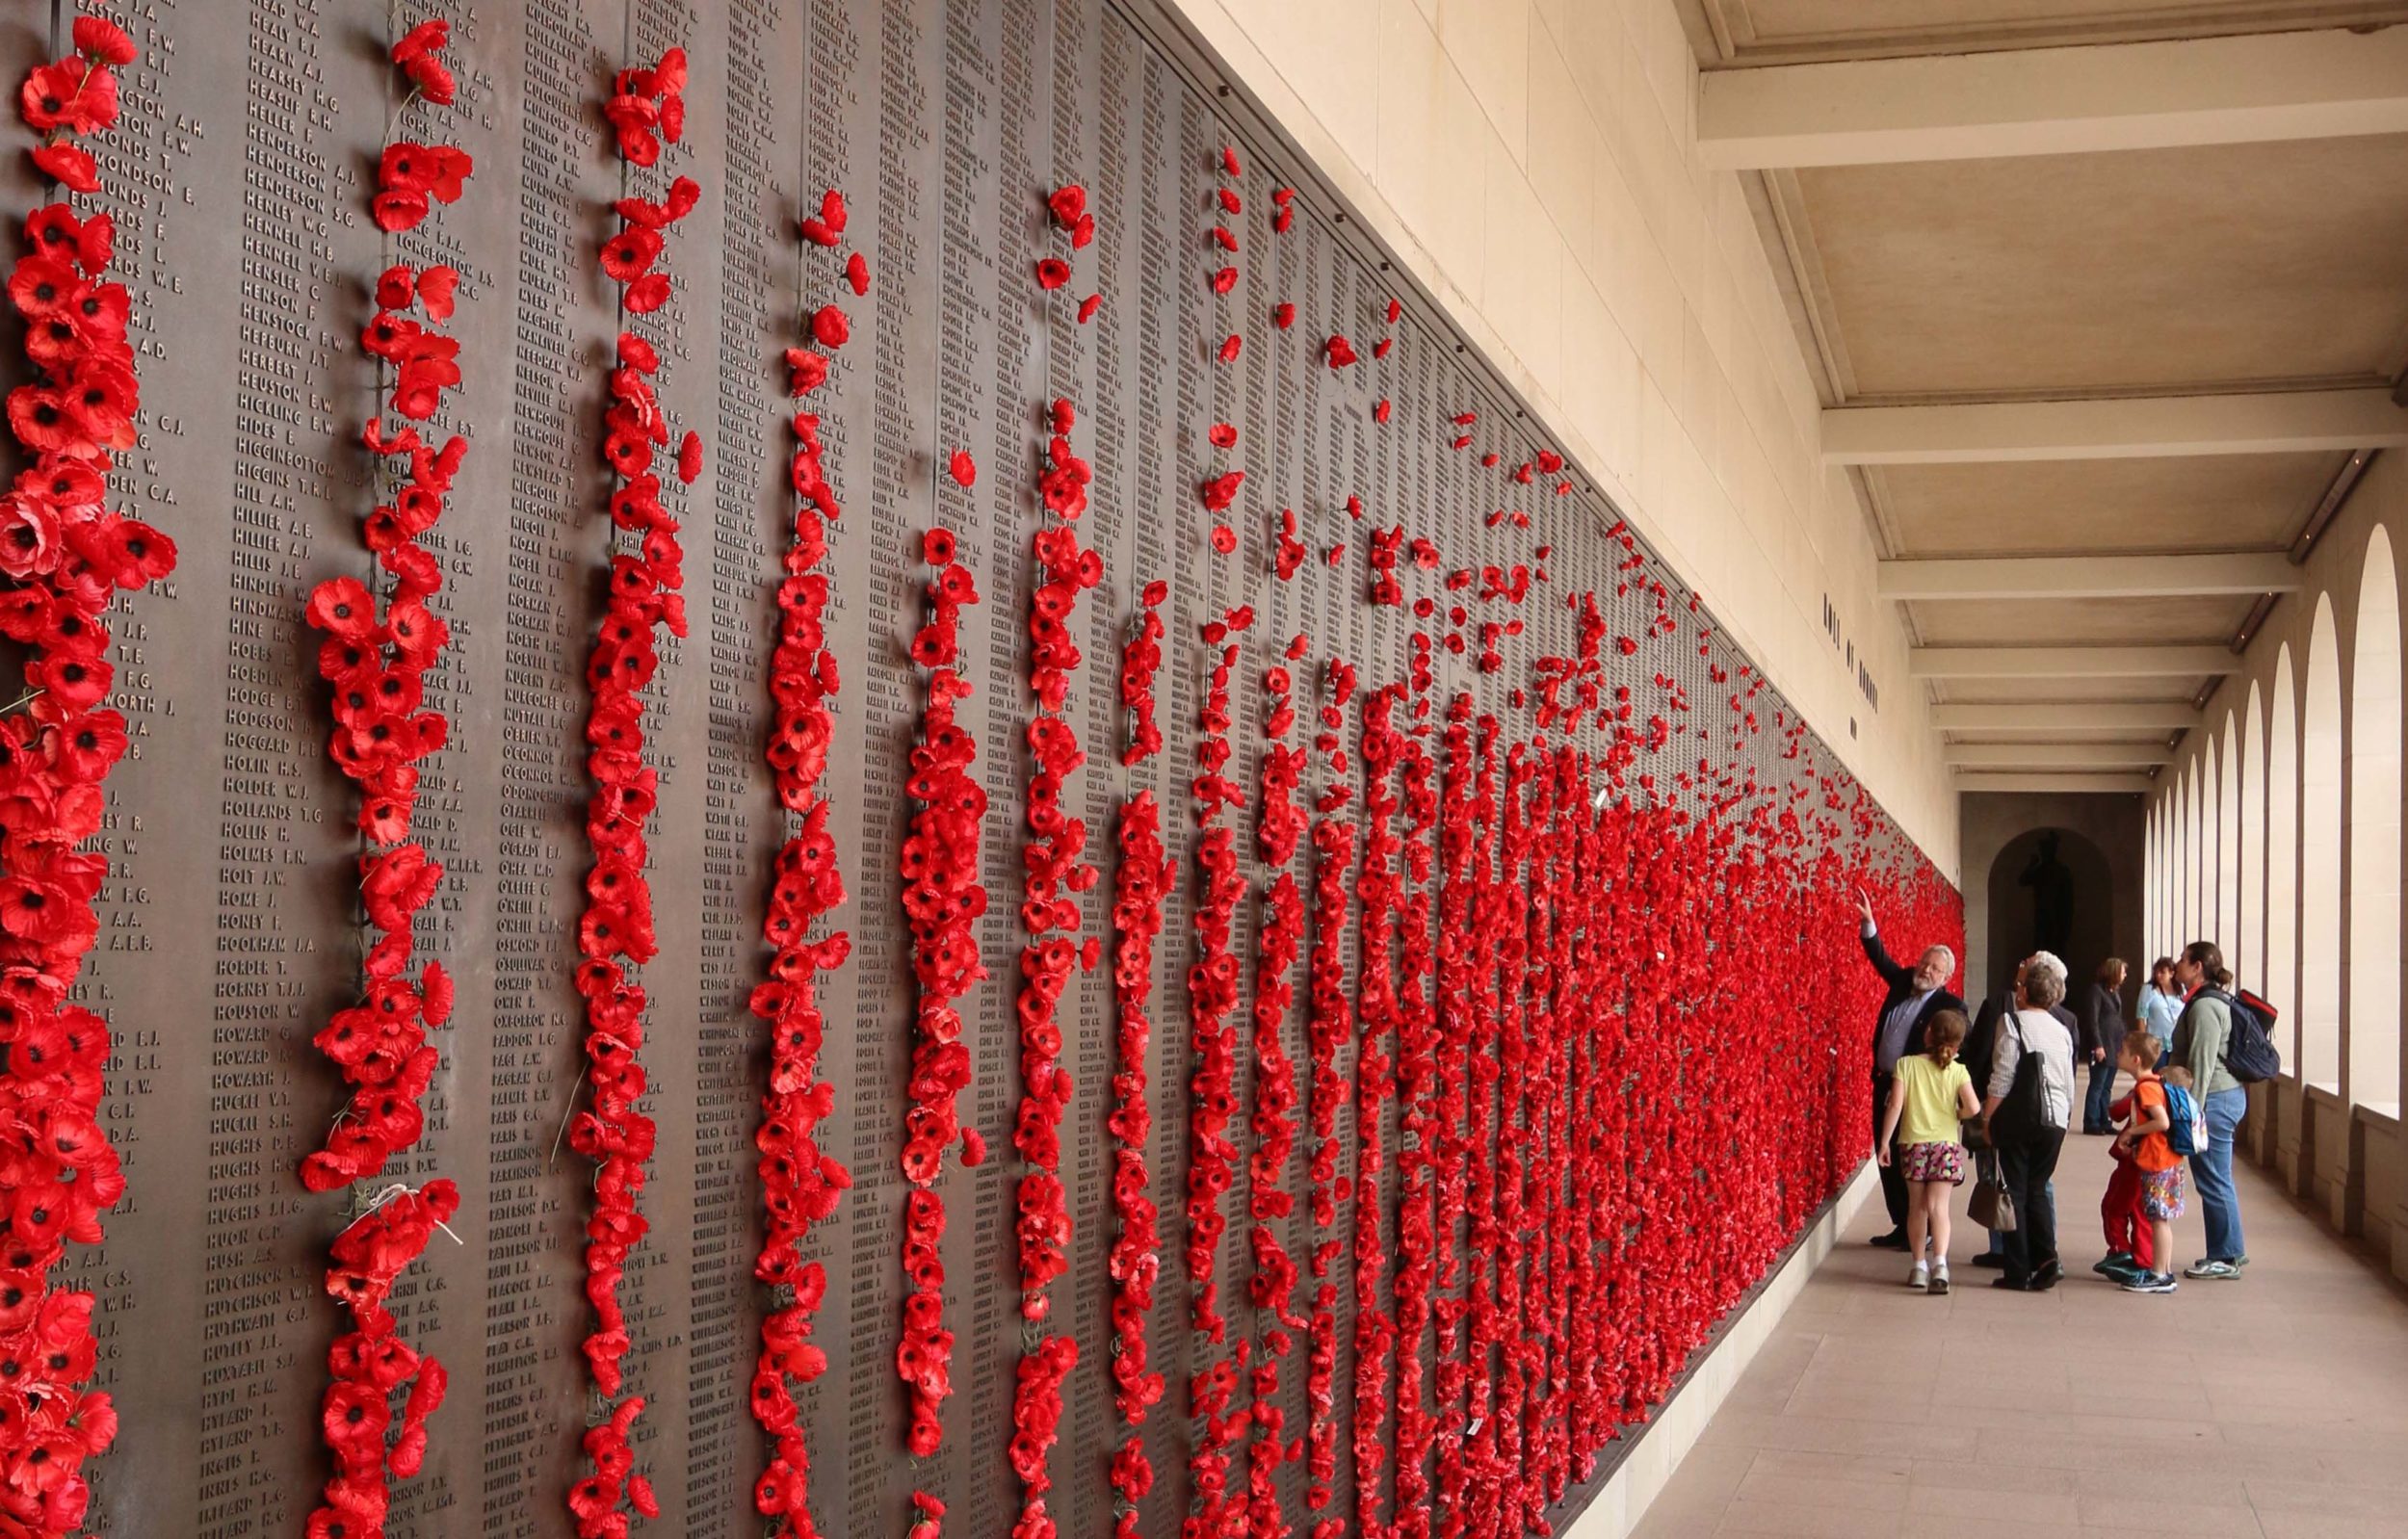 The Roll of Honour at the Australian War Memorial in Canberra